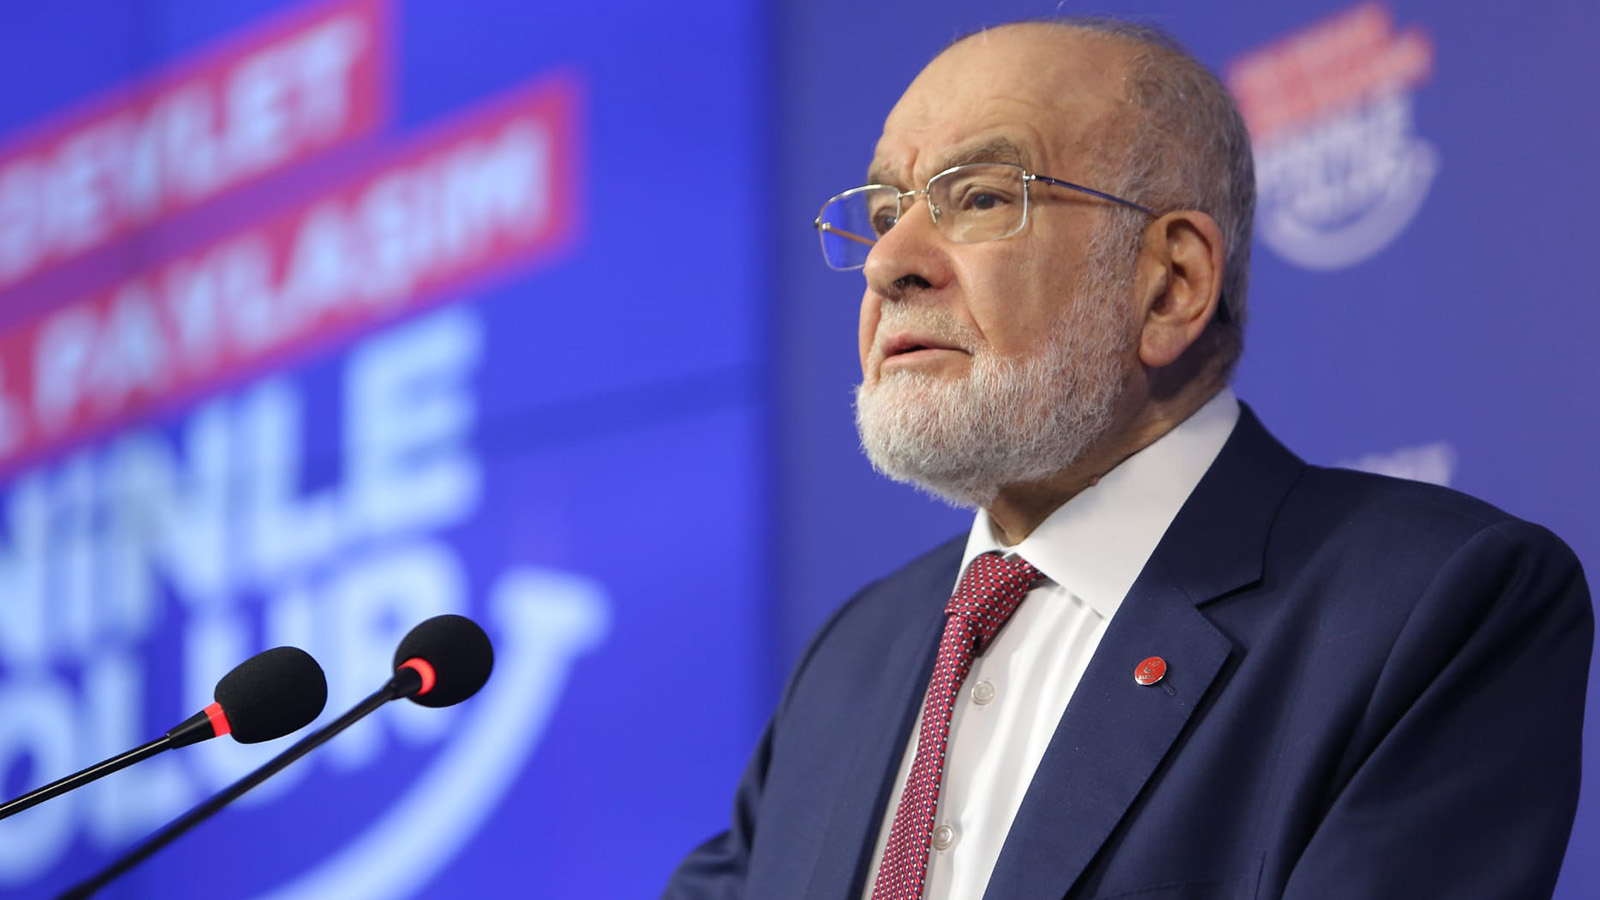 Saadet Party Leader Karamollaoglu: "This way is a dead end"